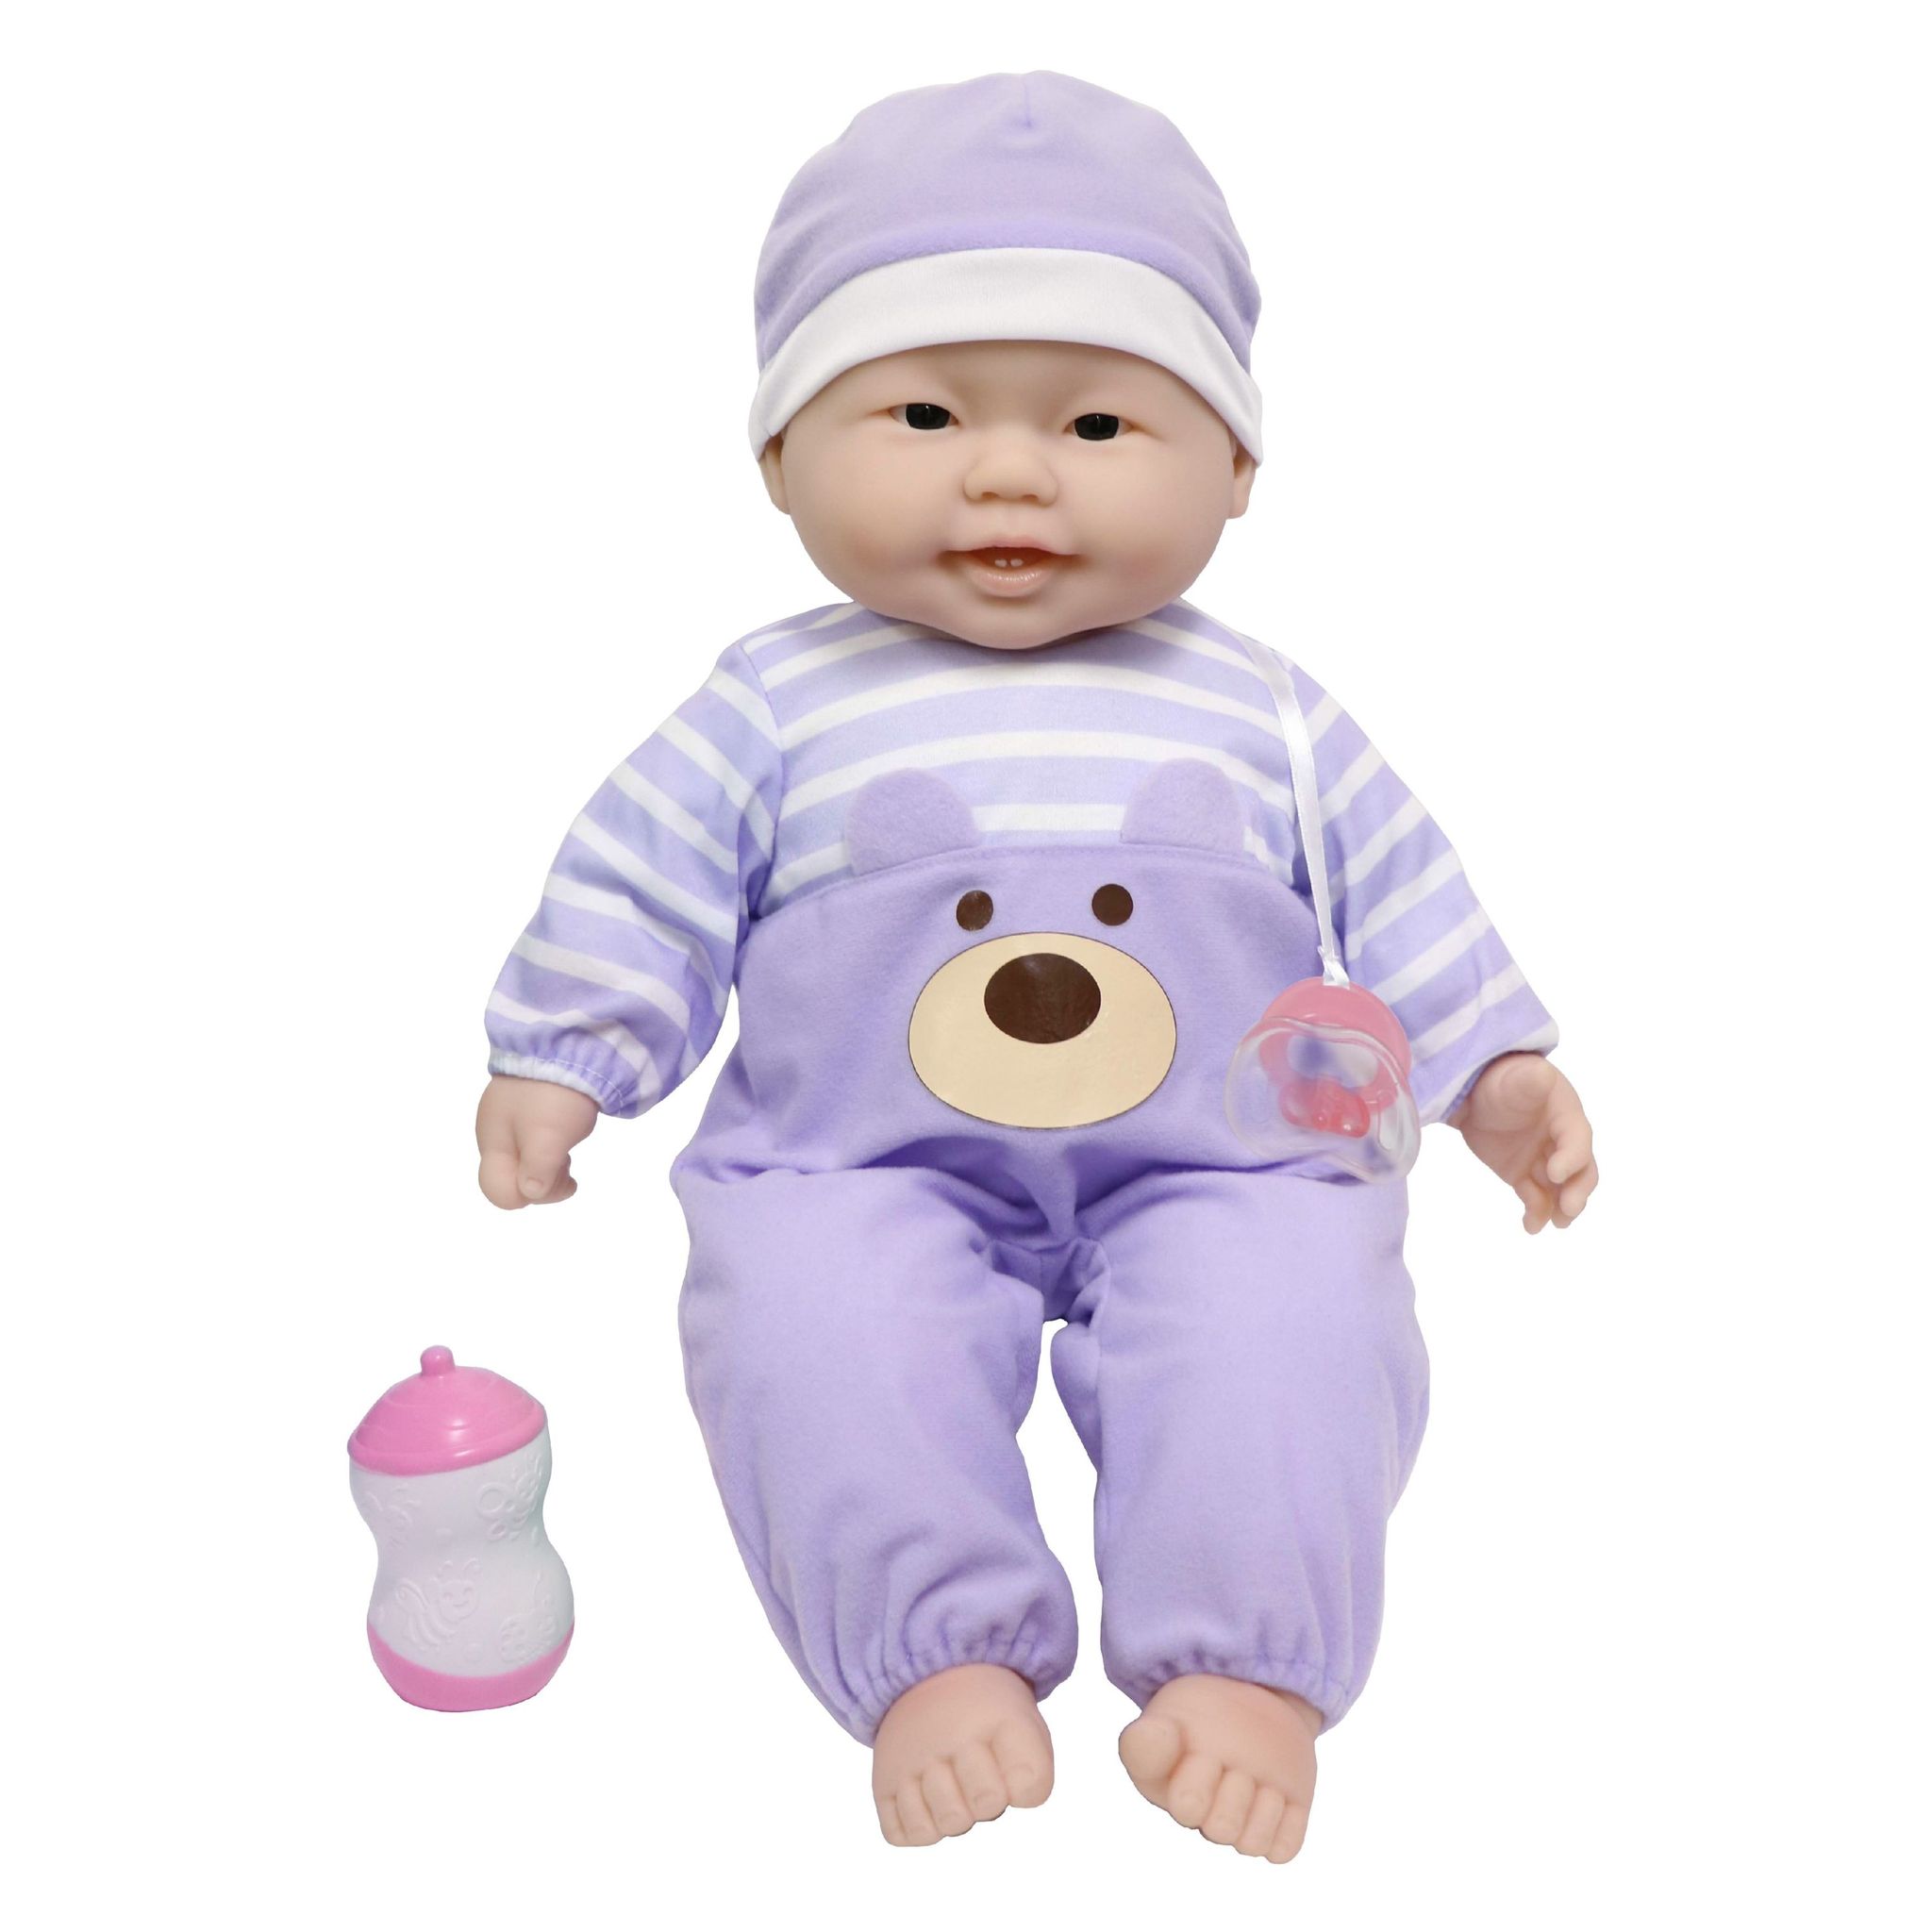 Lots to Cuddle Babies Asian Soft Body Baby Doll  Purple - 20 in -  Dolls By Berenguer, 35018